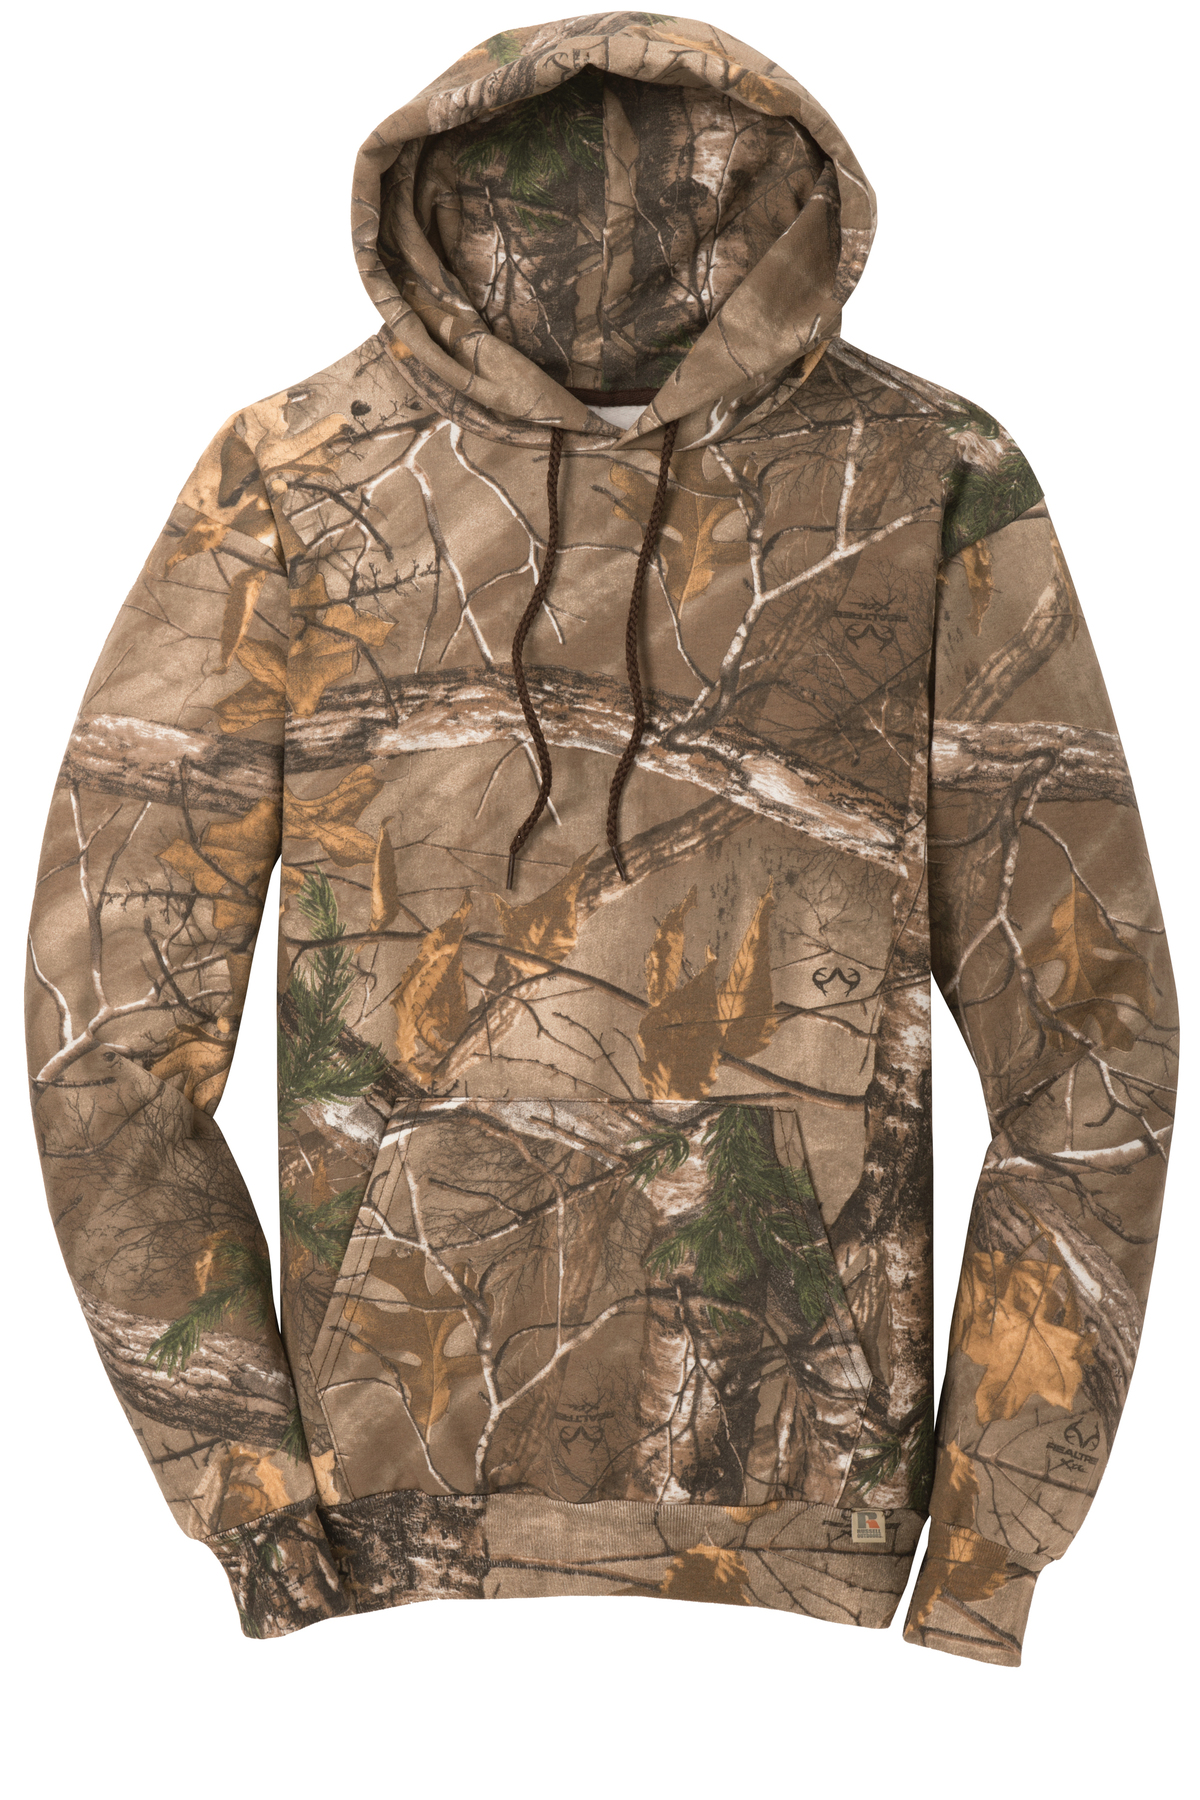 Russell Outdoors Mens Realtree AP Camo Hooded Sweatshirt Size S-3XL NEW S459R 